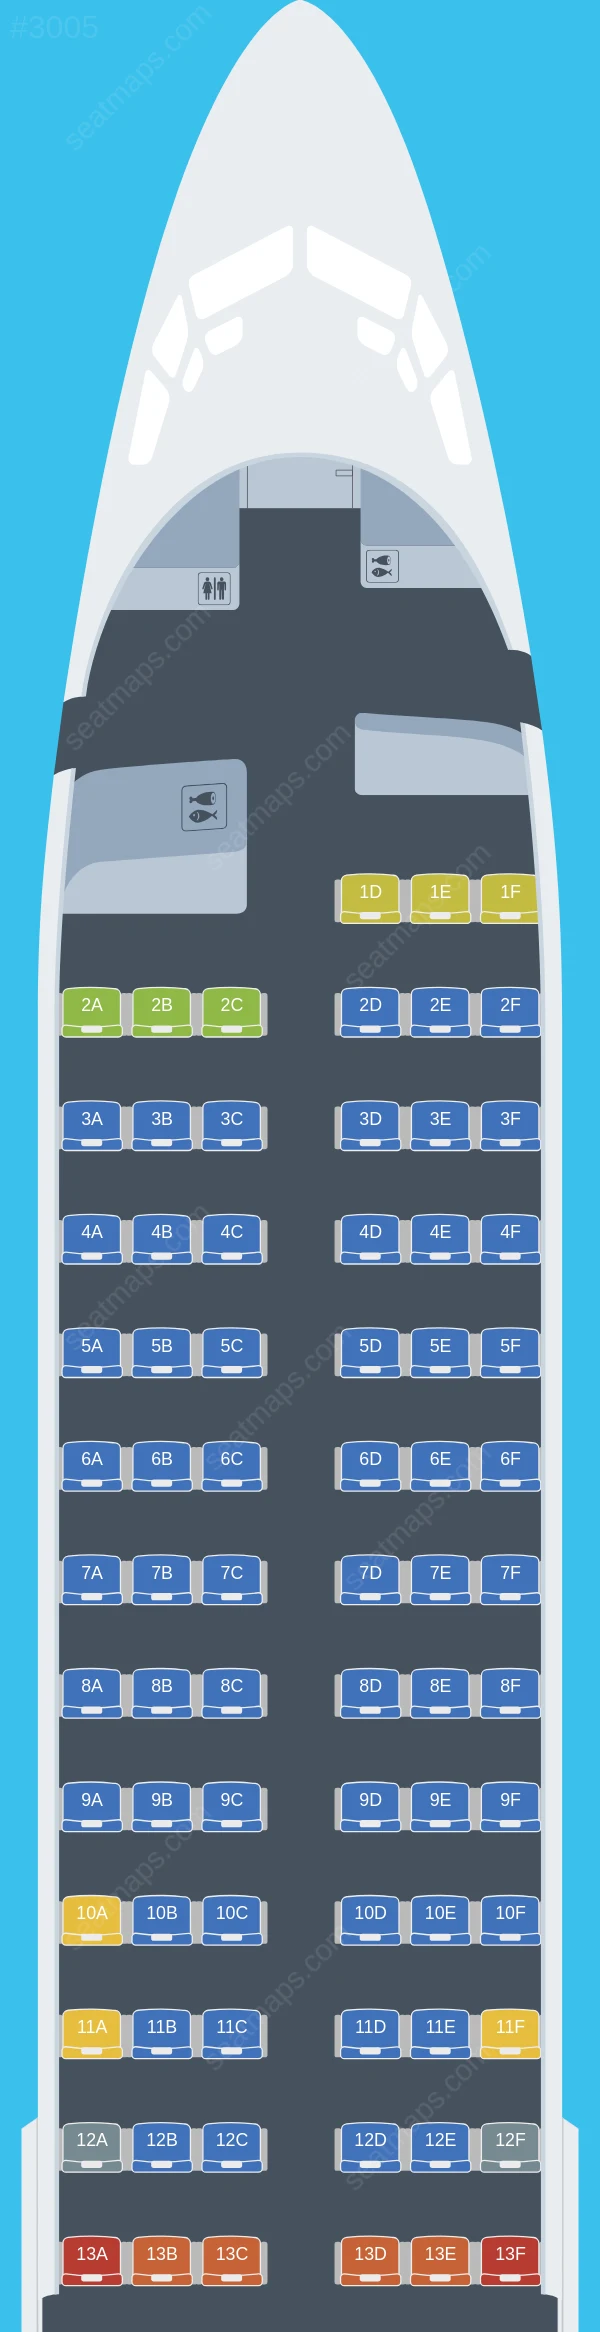 Southwest Airlines Boeing 737-800 seatmap preview